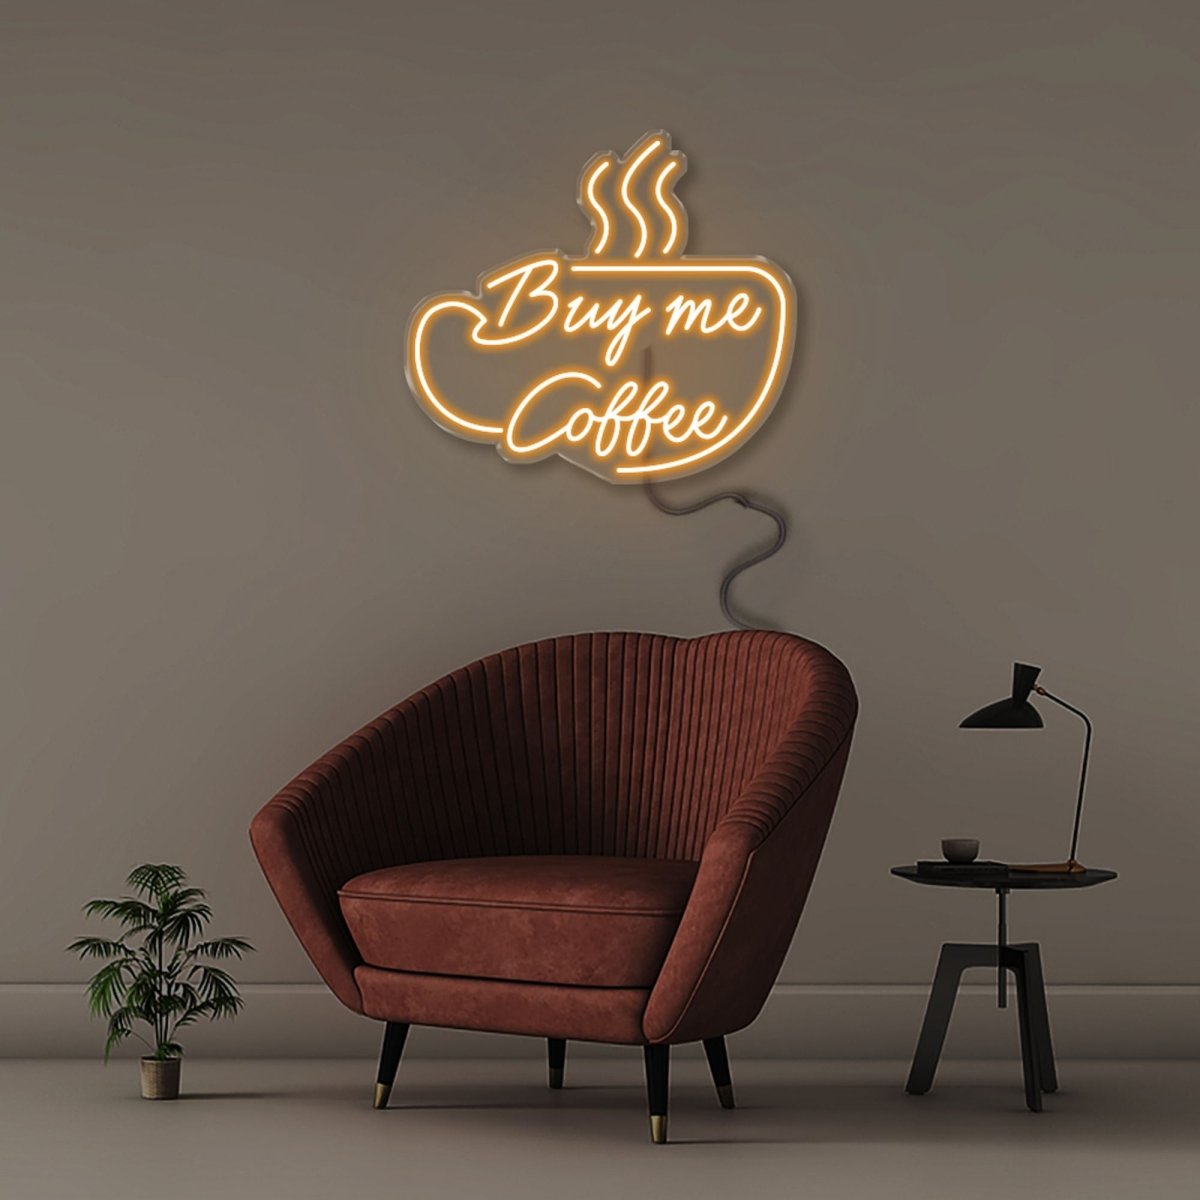 Buy Me Coffee - Neonific - LED Neon Signs - 61cm (24") -